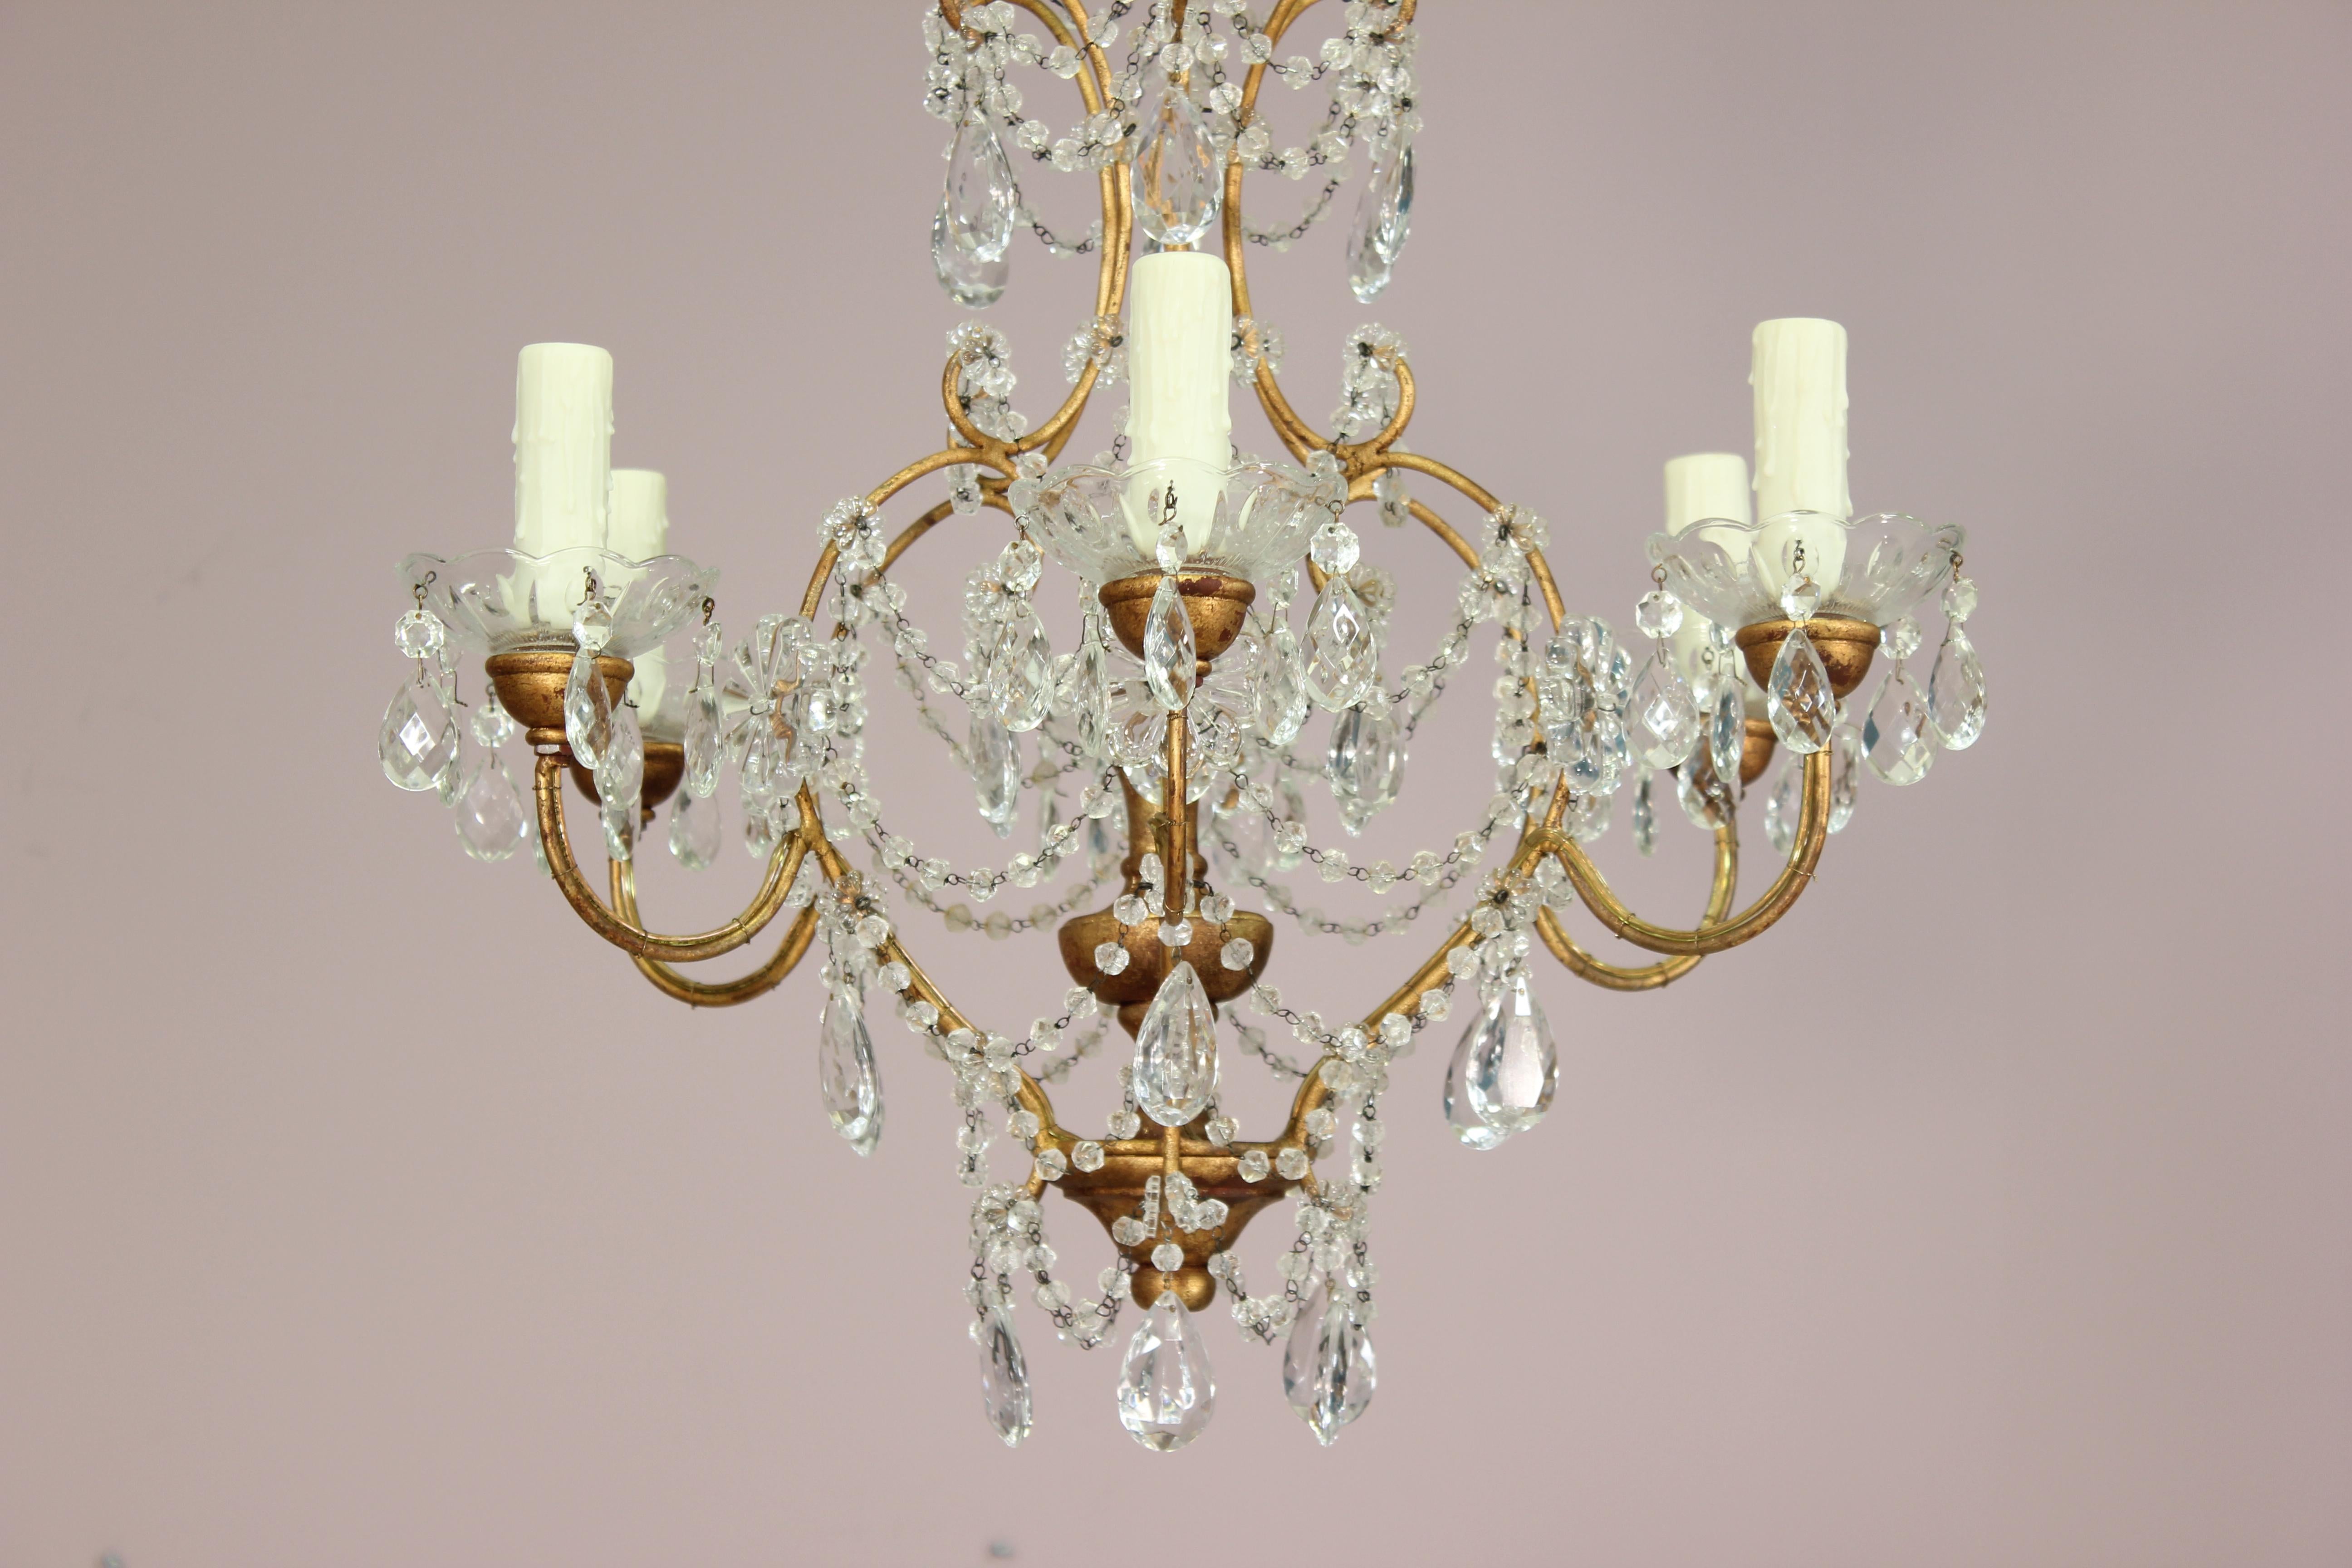 Charming Italian gilt iron crystal chandelier with giltwood accents in the Rococo style. The chandelier features a delicately shaped gilded iron frame which is decorated with garlands of English cut beads and faceted prisms. 
Wired and in working